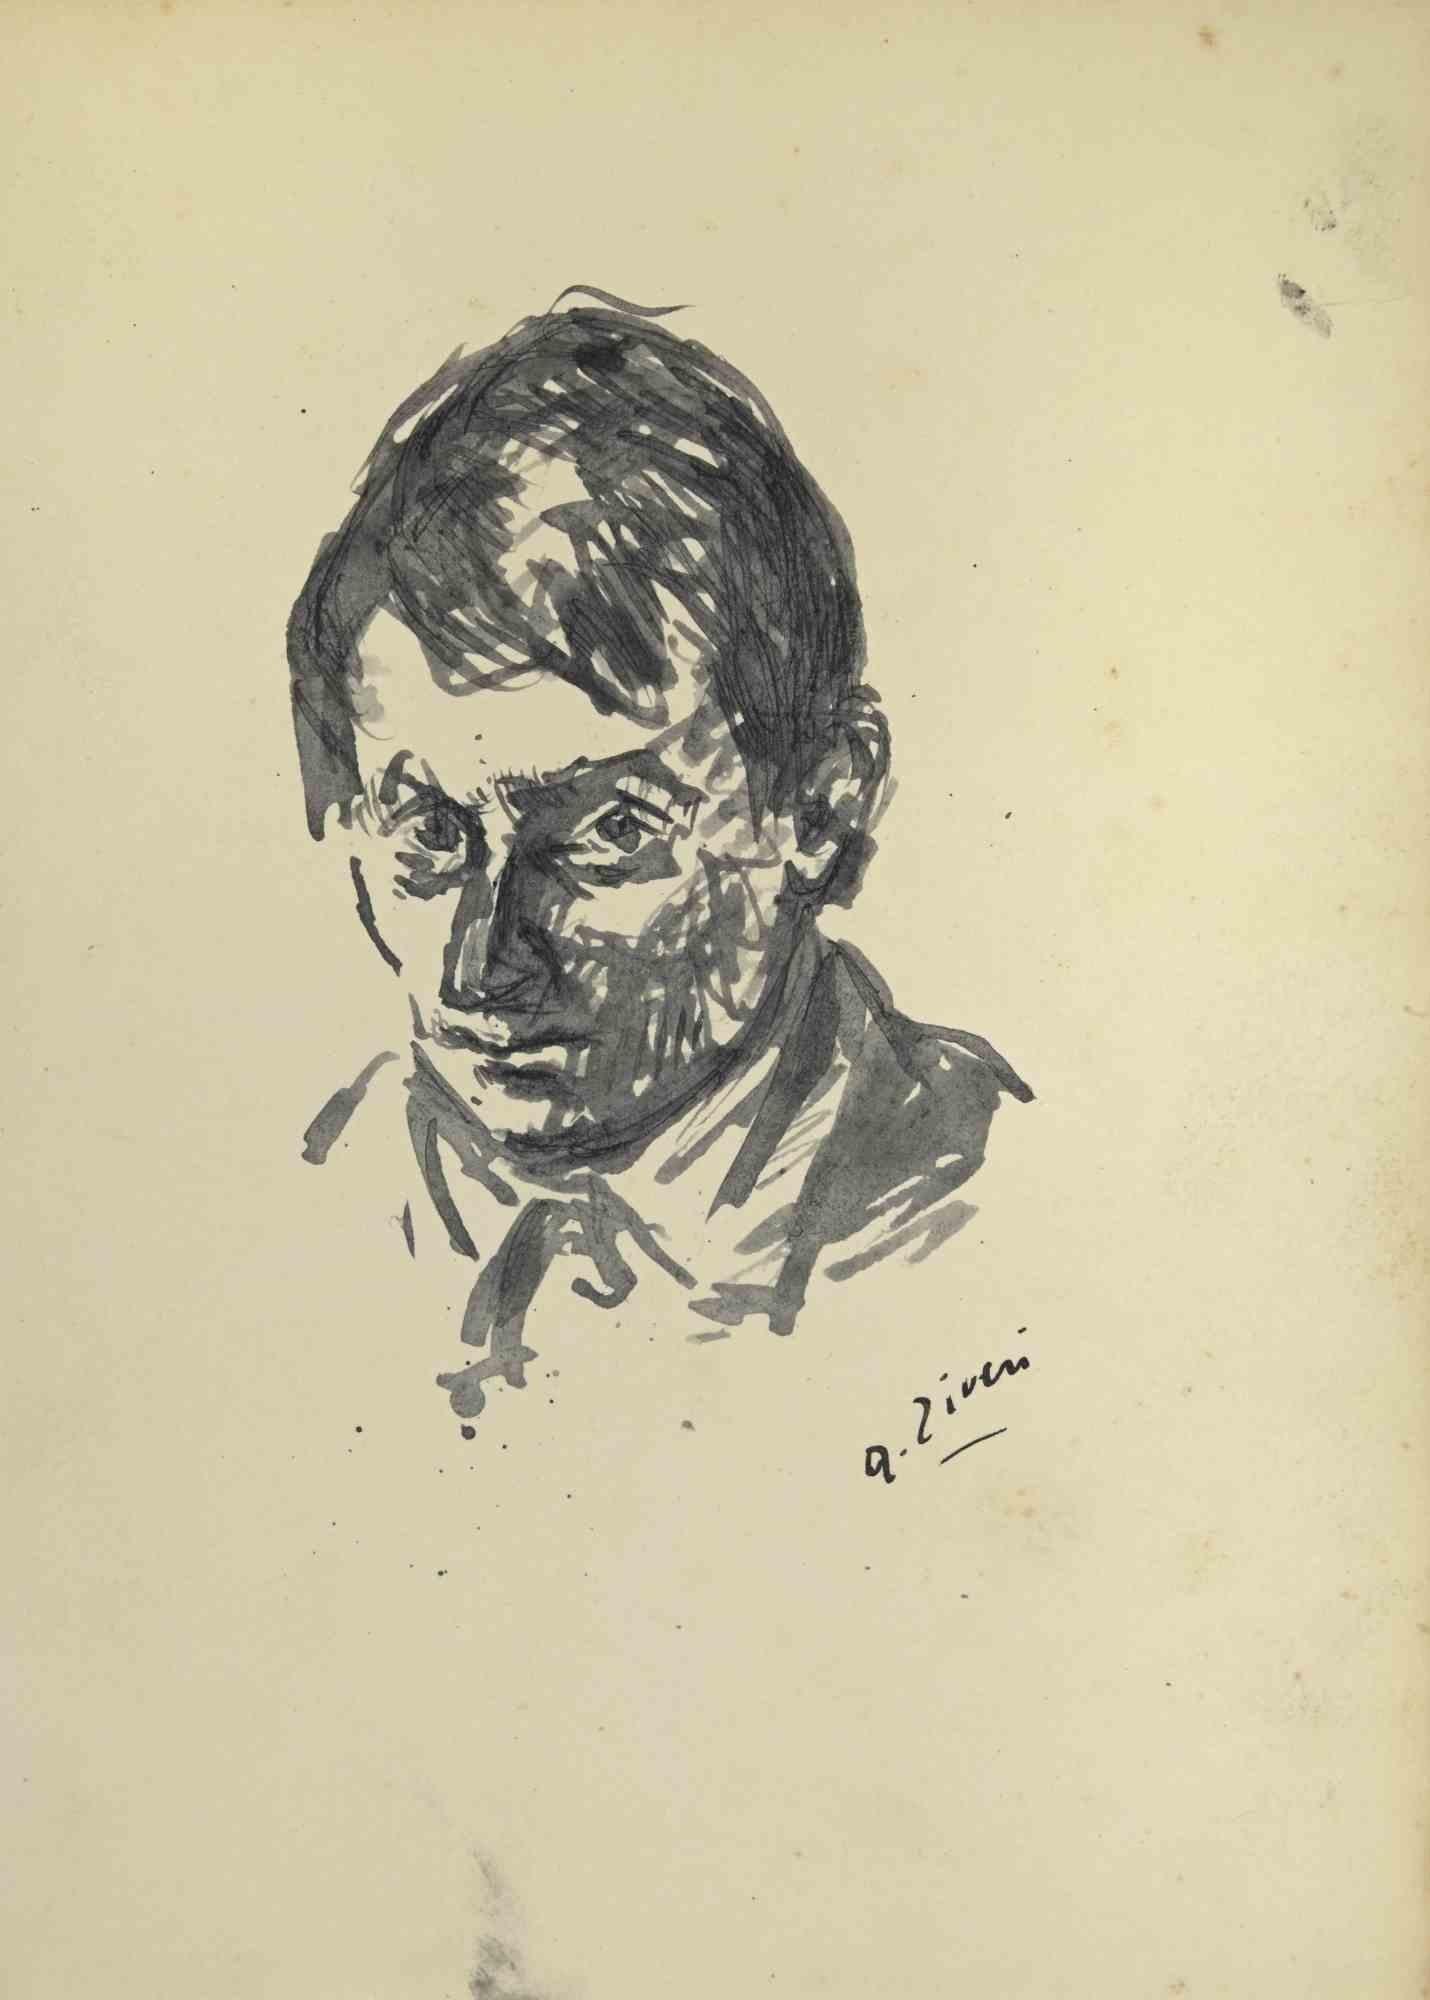 Portrait is a drawing realized by Alberto Ziveri in the 1930s.

Watercolor on paper.

Hand-signed.

In good conditions with foxing.

The artwork is represented through deft strokes masterly.

Alberto Ziveri (Rome,1908 – 1990), the Italian painter of